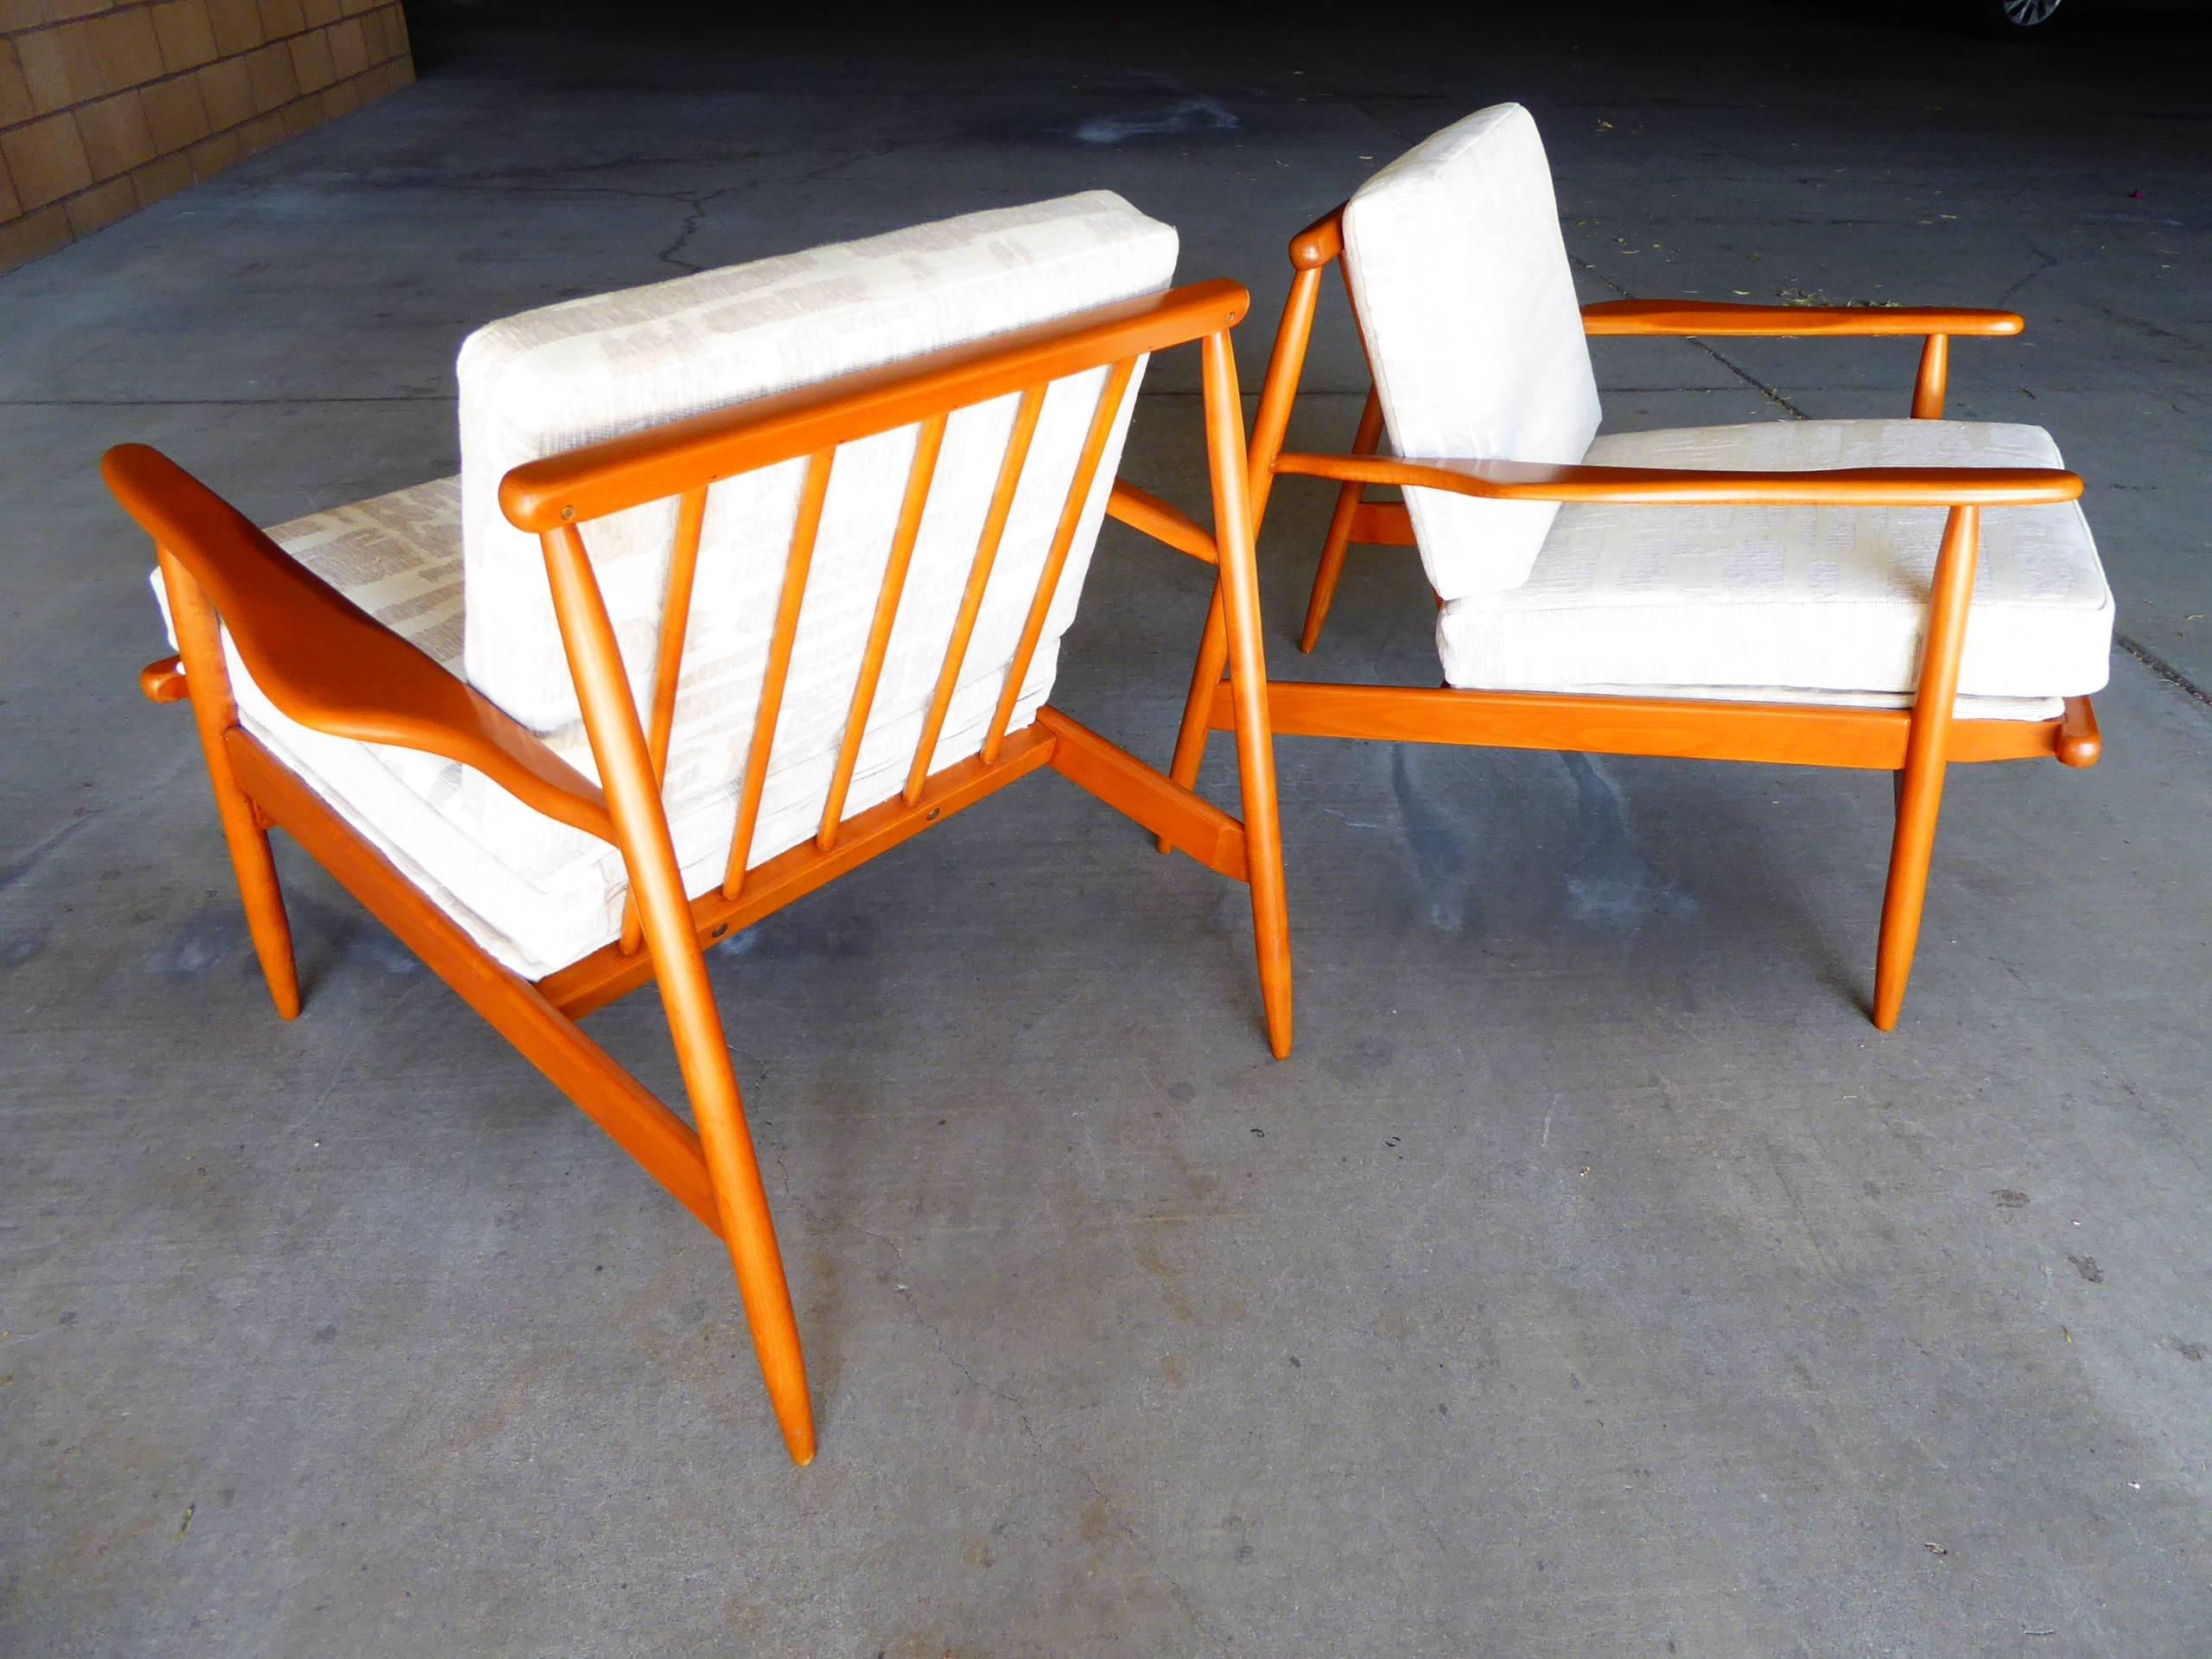 A beautiful pair of mid 20th century maple "slat back" lounge chairs. 
these chairs have really interesting lines with a deep set back on the legs and a reverse angle on the slat supports. The chairs are extremely comfortable.
these are